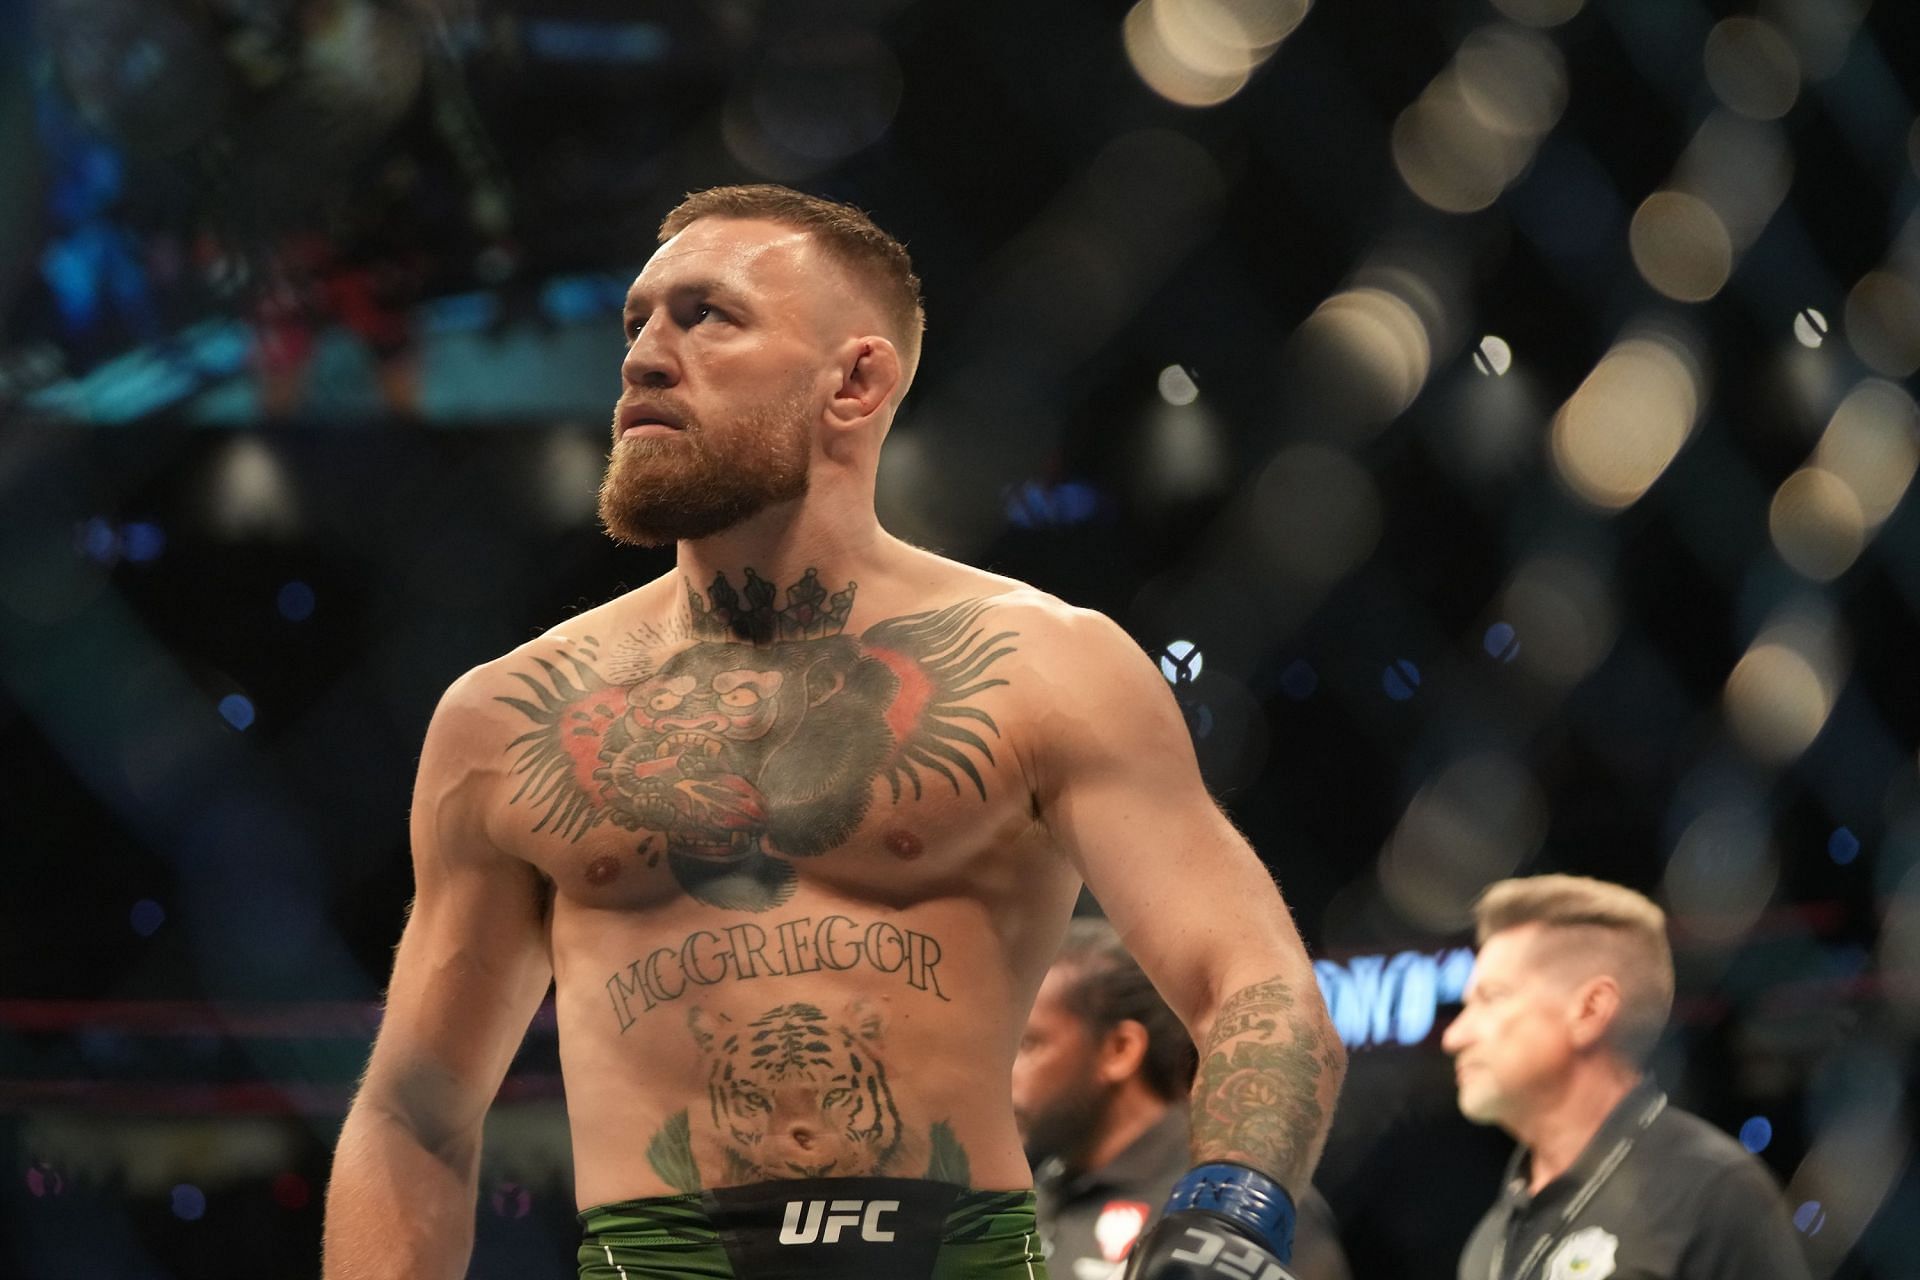 Conor McGregor last competed at UFC 264